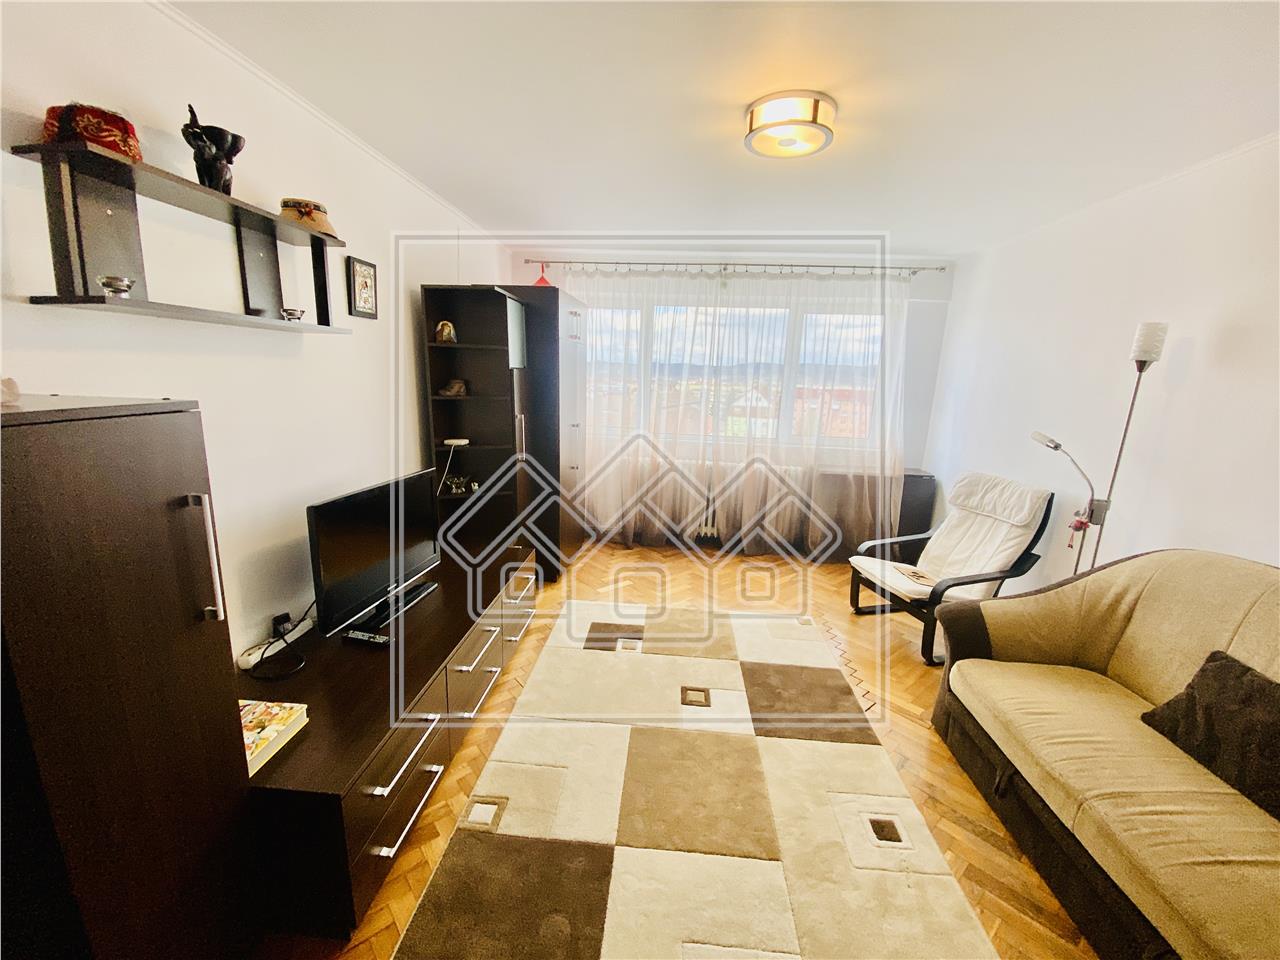 Apartment for rent in Sibiu - 2 rooms and balcony - Mihai Viteazu